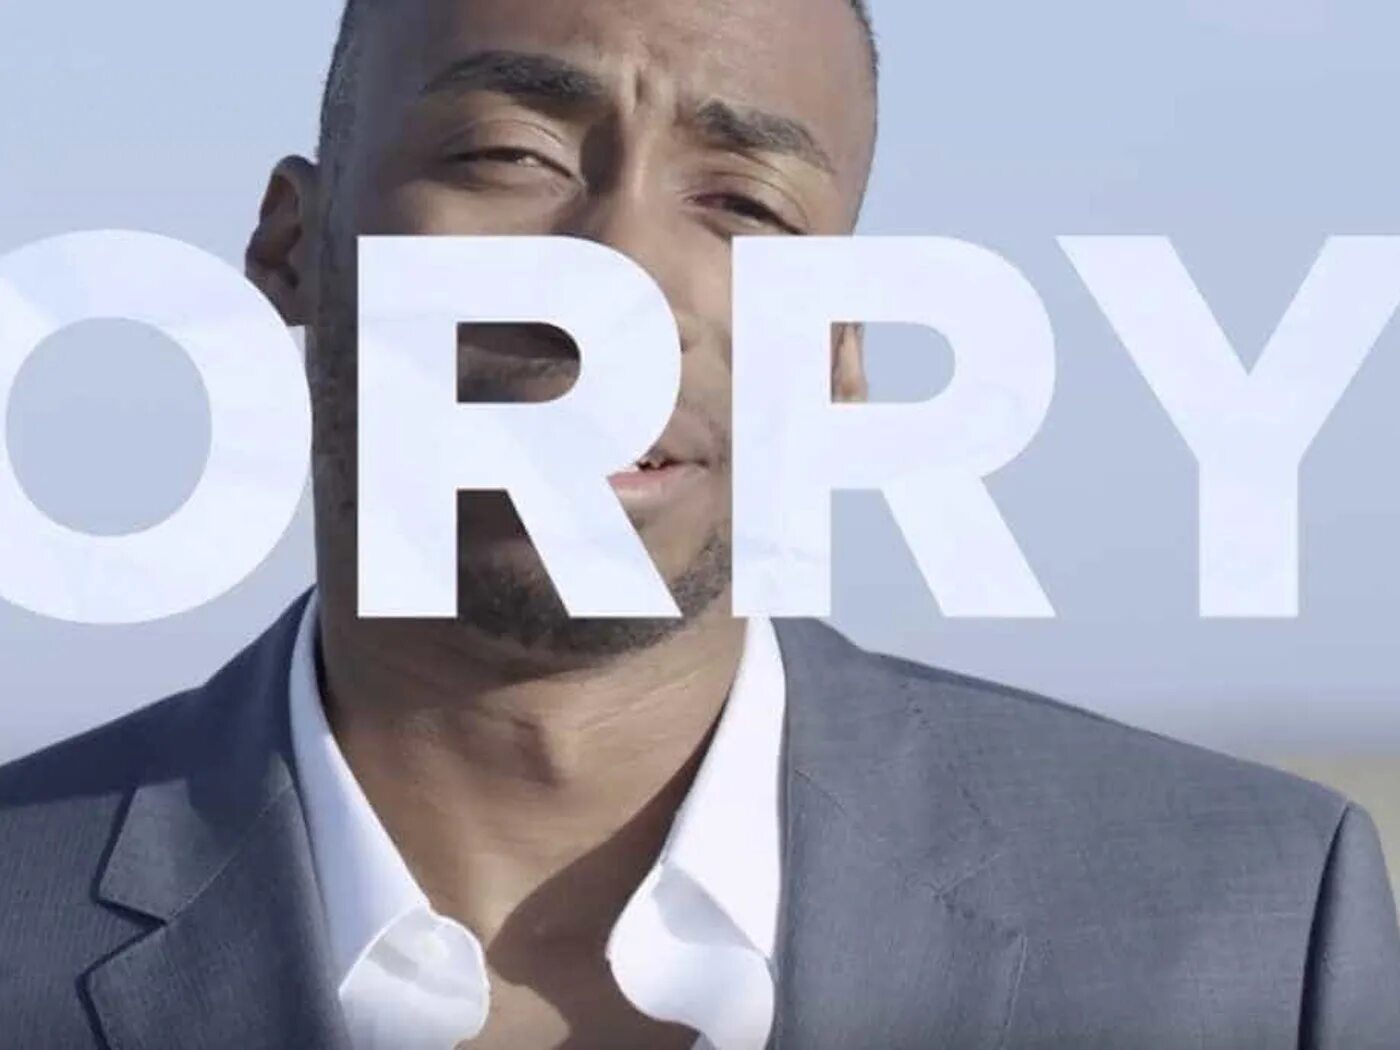 Dear future. Prince EA. "An apology Letter to Future Generations. Sorry ".